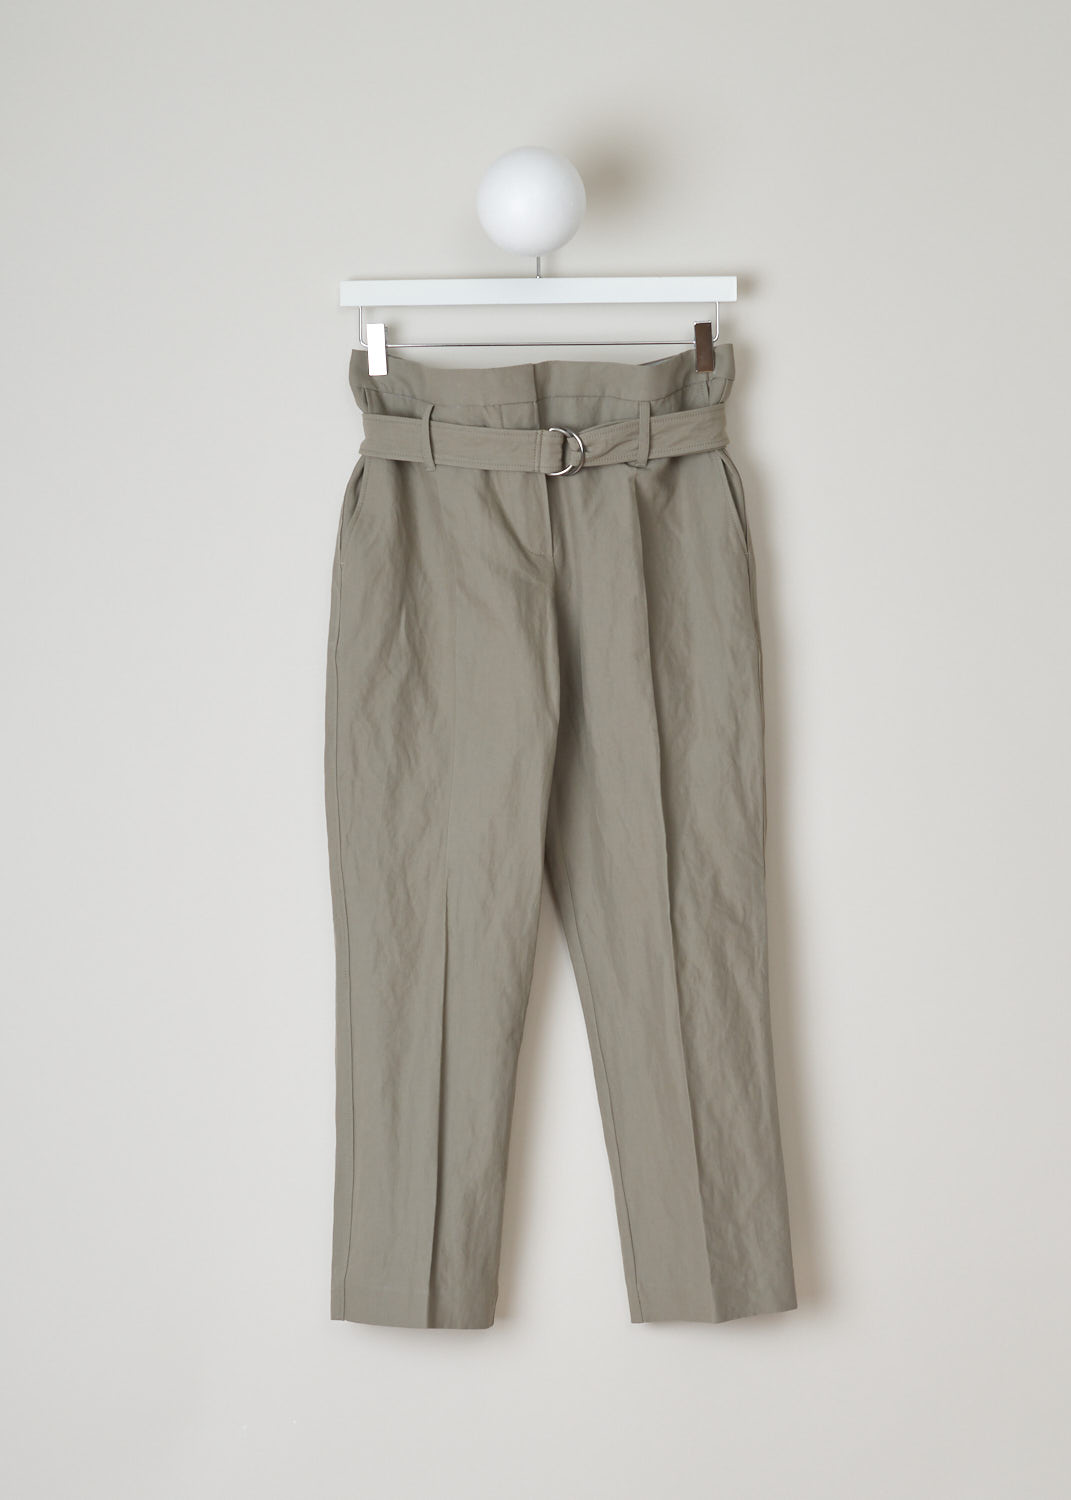 Brunello Cucinelli, khaki paperbag waist pants, M0H59P6542_C3673, green, front, High-waisted paperbag pants with a D-ring belt. The cropped length allows you to show off any shoe you wear. As a closure option, this model has a zipper with metal clip and backing buttons. At the front, these pants have two side pockets and two welt pockets at the back.